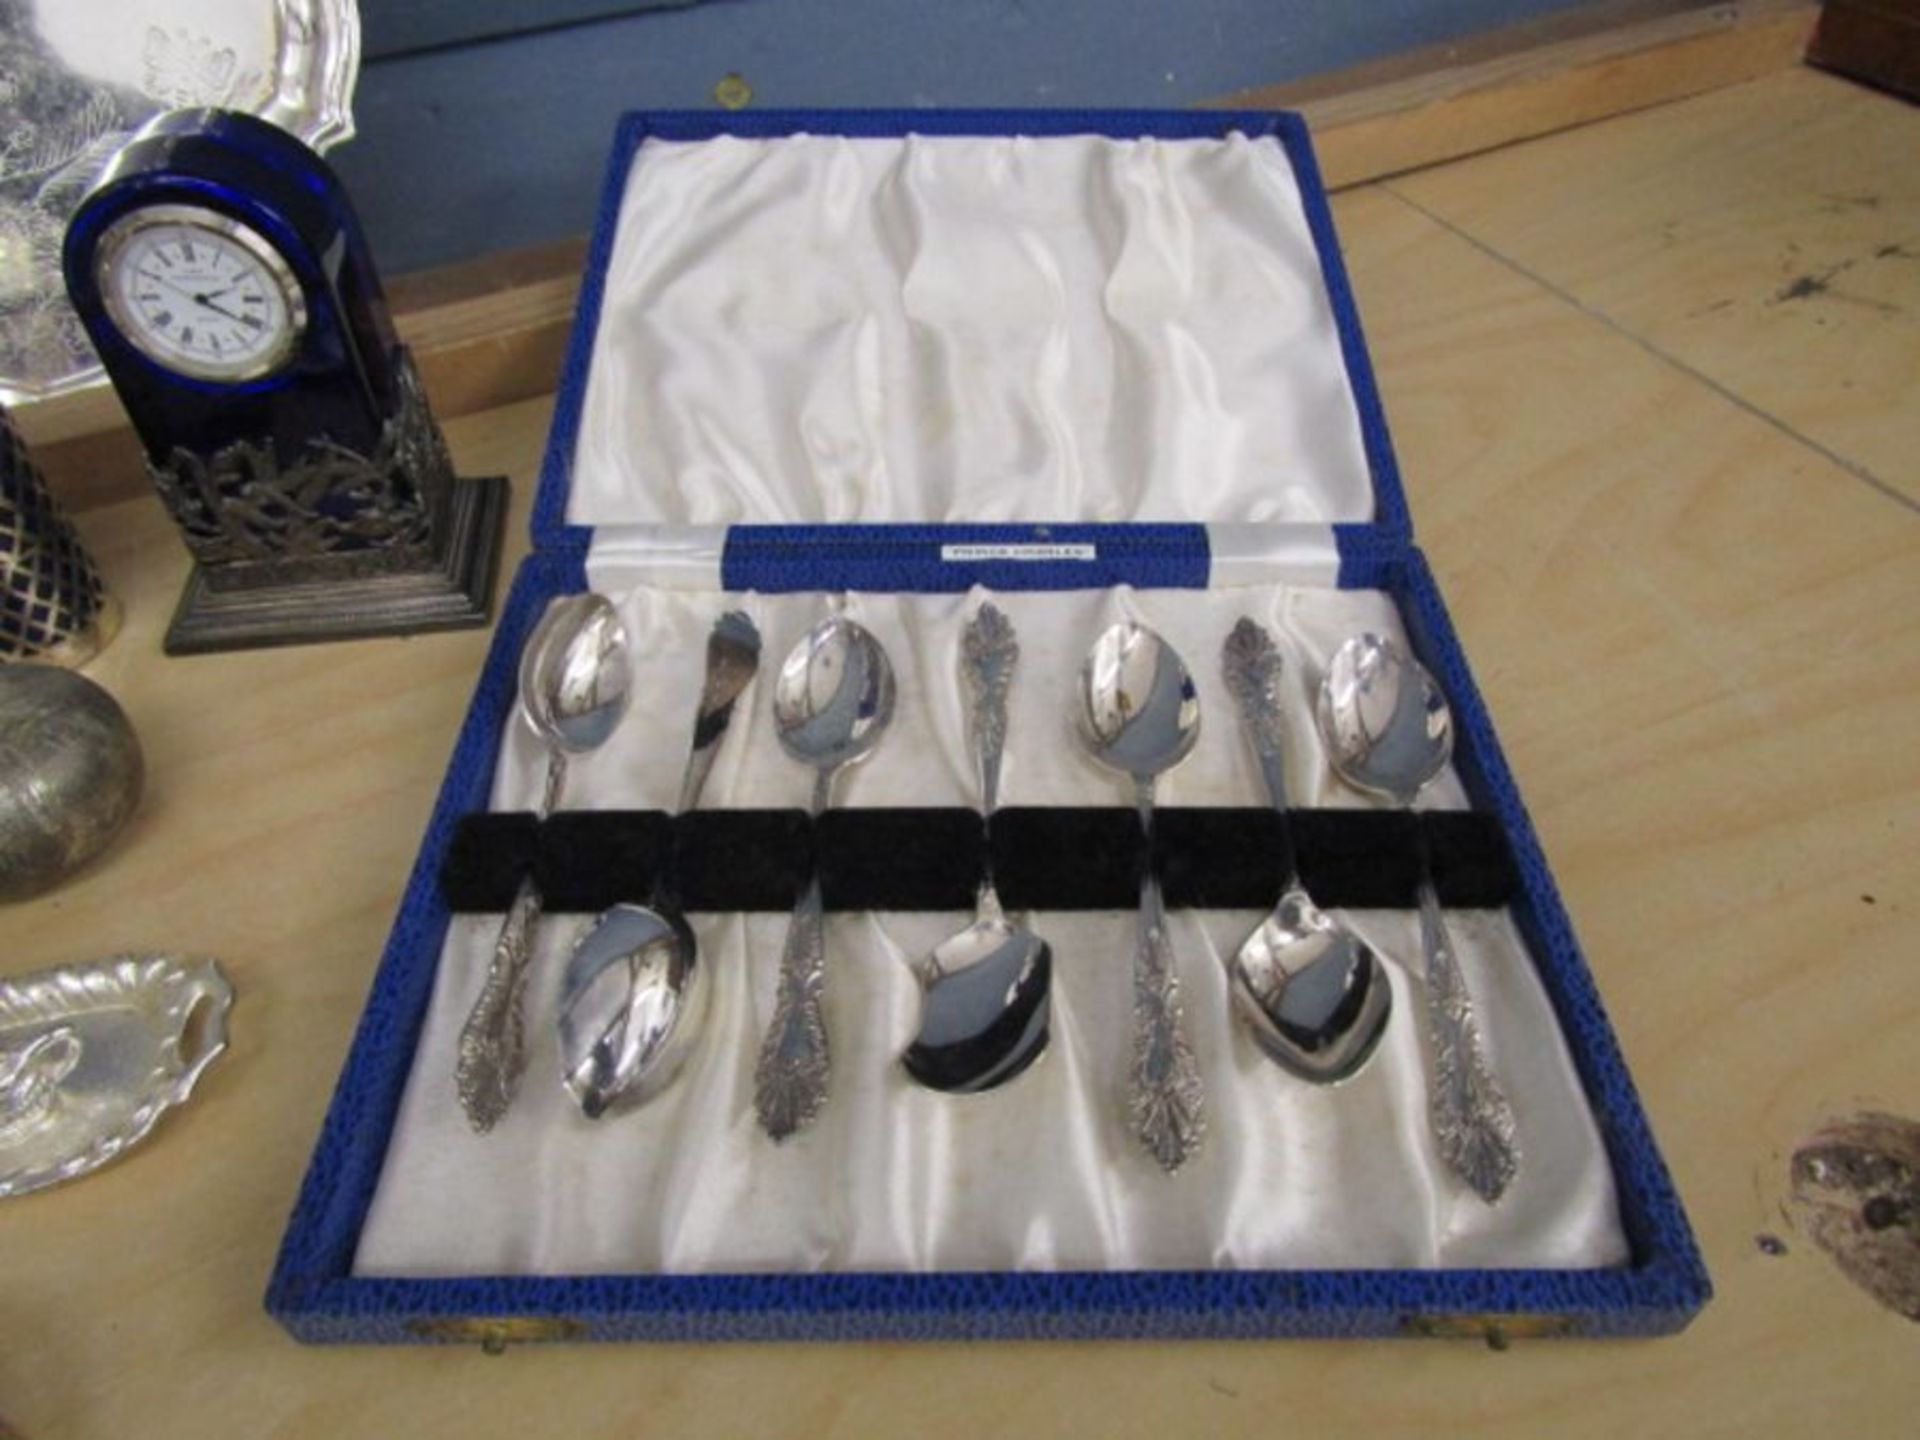 Mixed plated items to include serving dishes, cutlery and salt and pepper shakers etc - Image 2 of 5